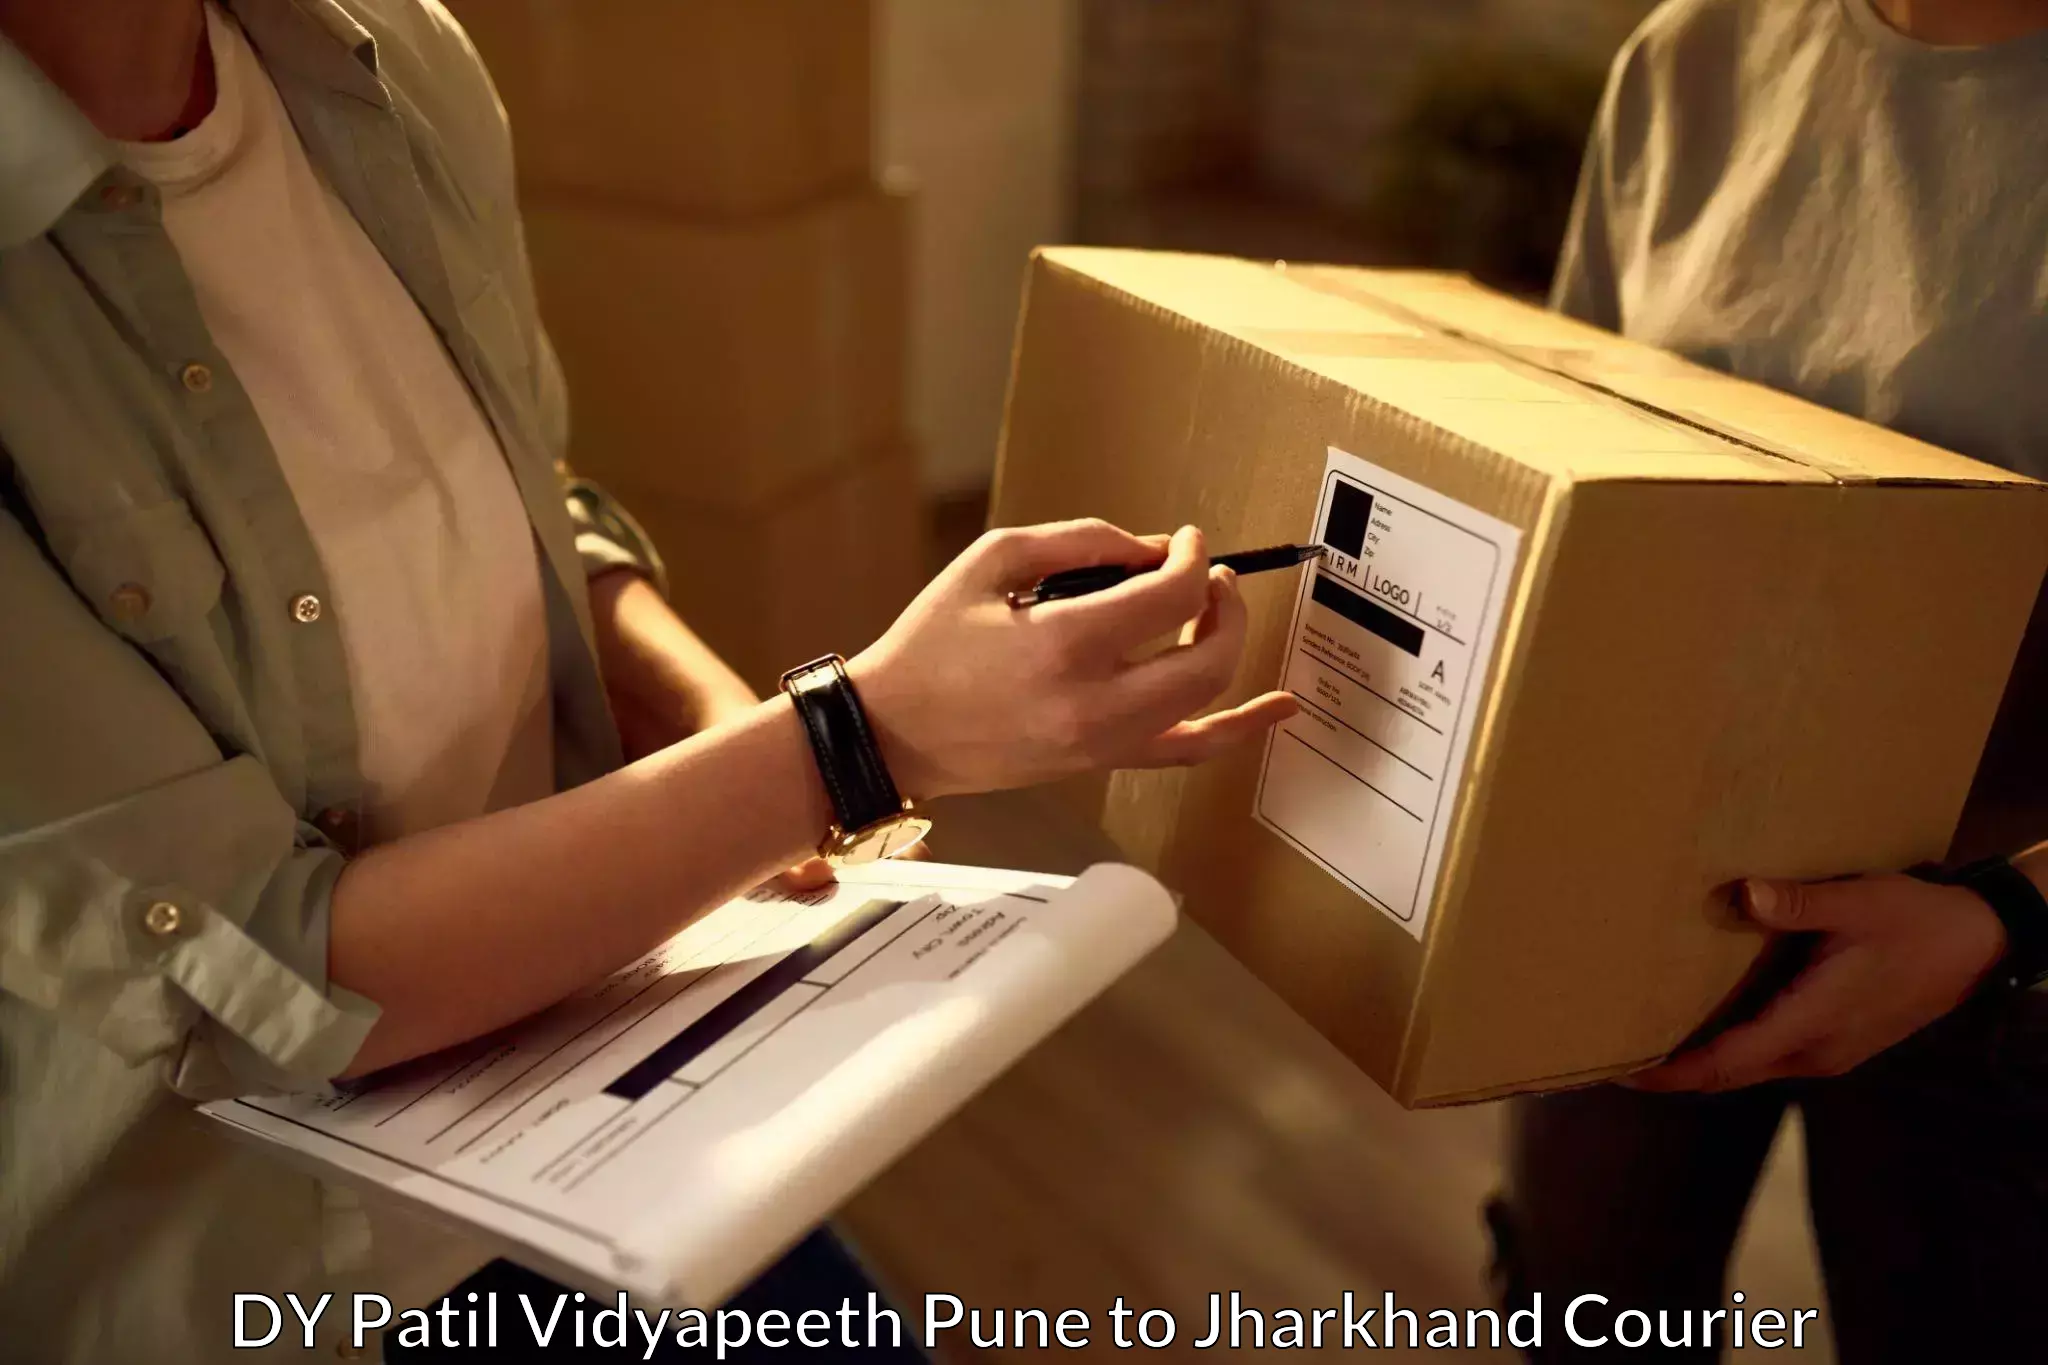 Global shipping solutions in DY Patil Vidyapeeth Pune to Jharkhand